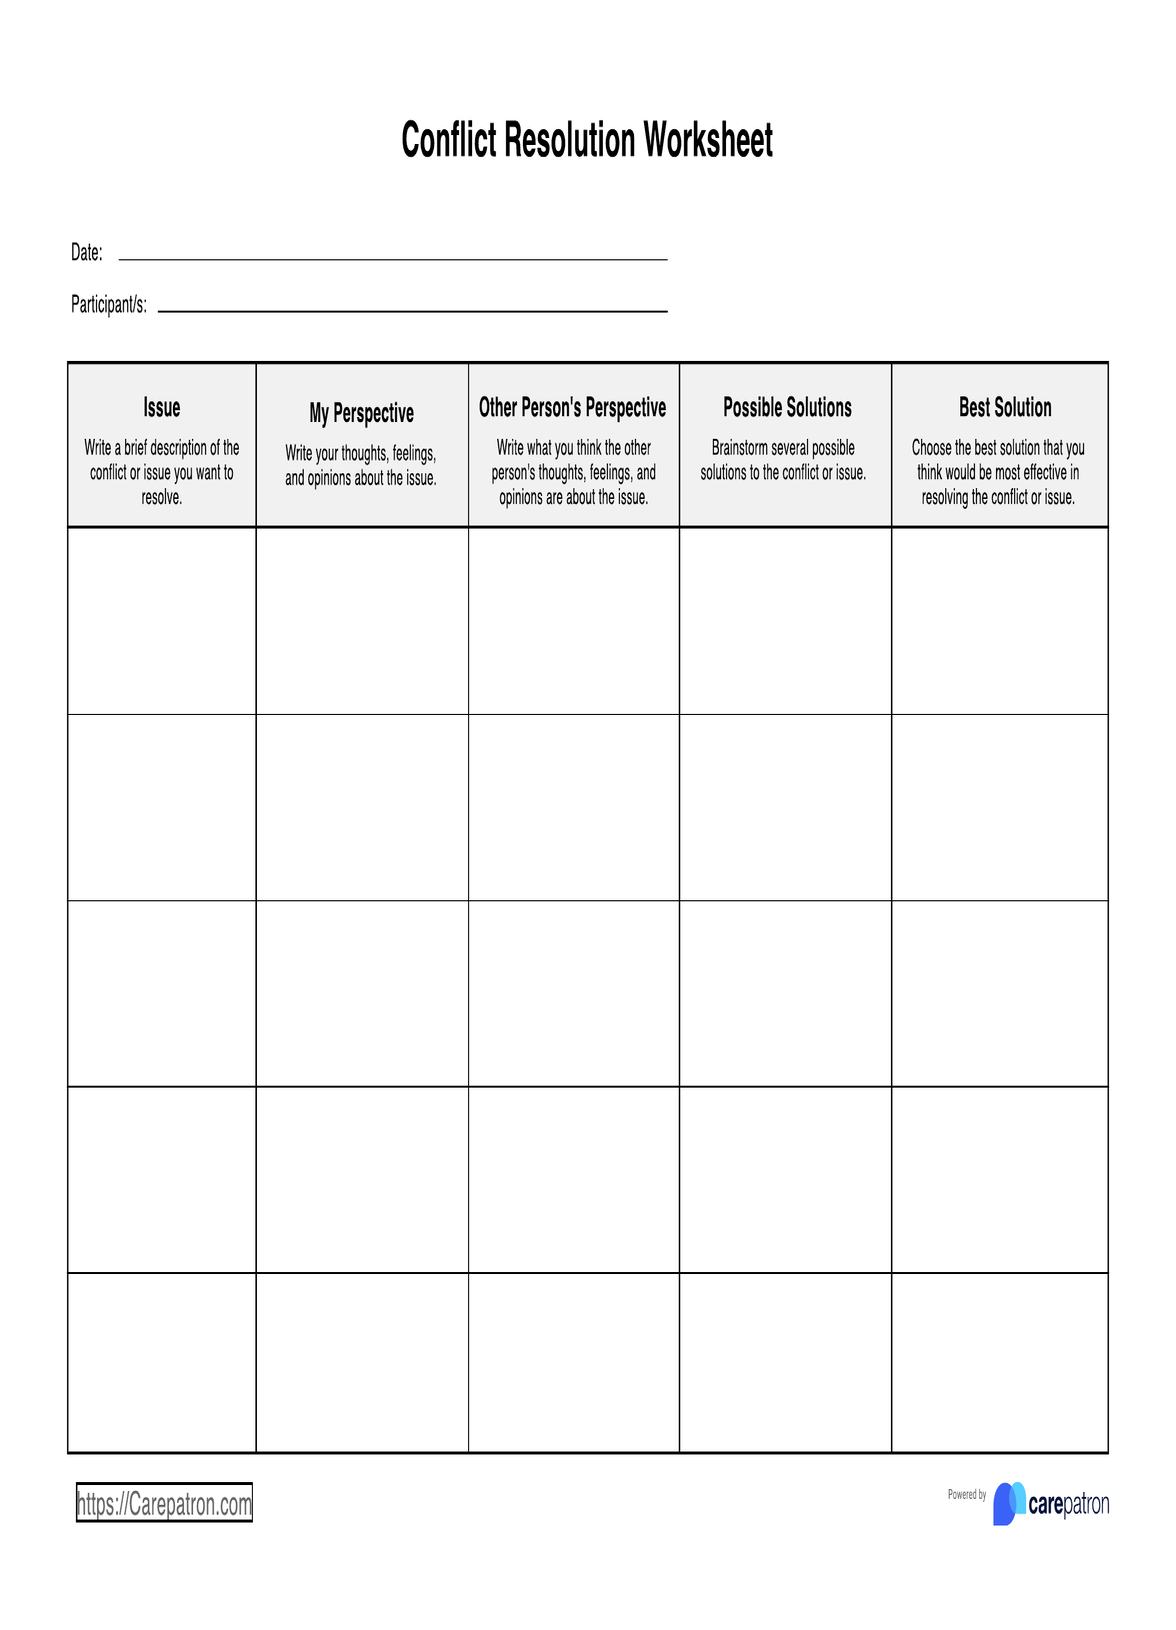 Conflict Resolution Worksheets PDF Example